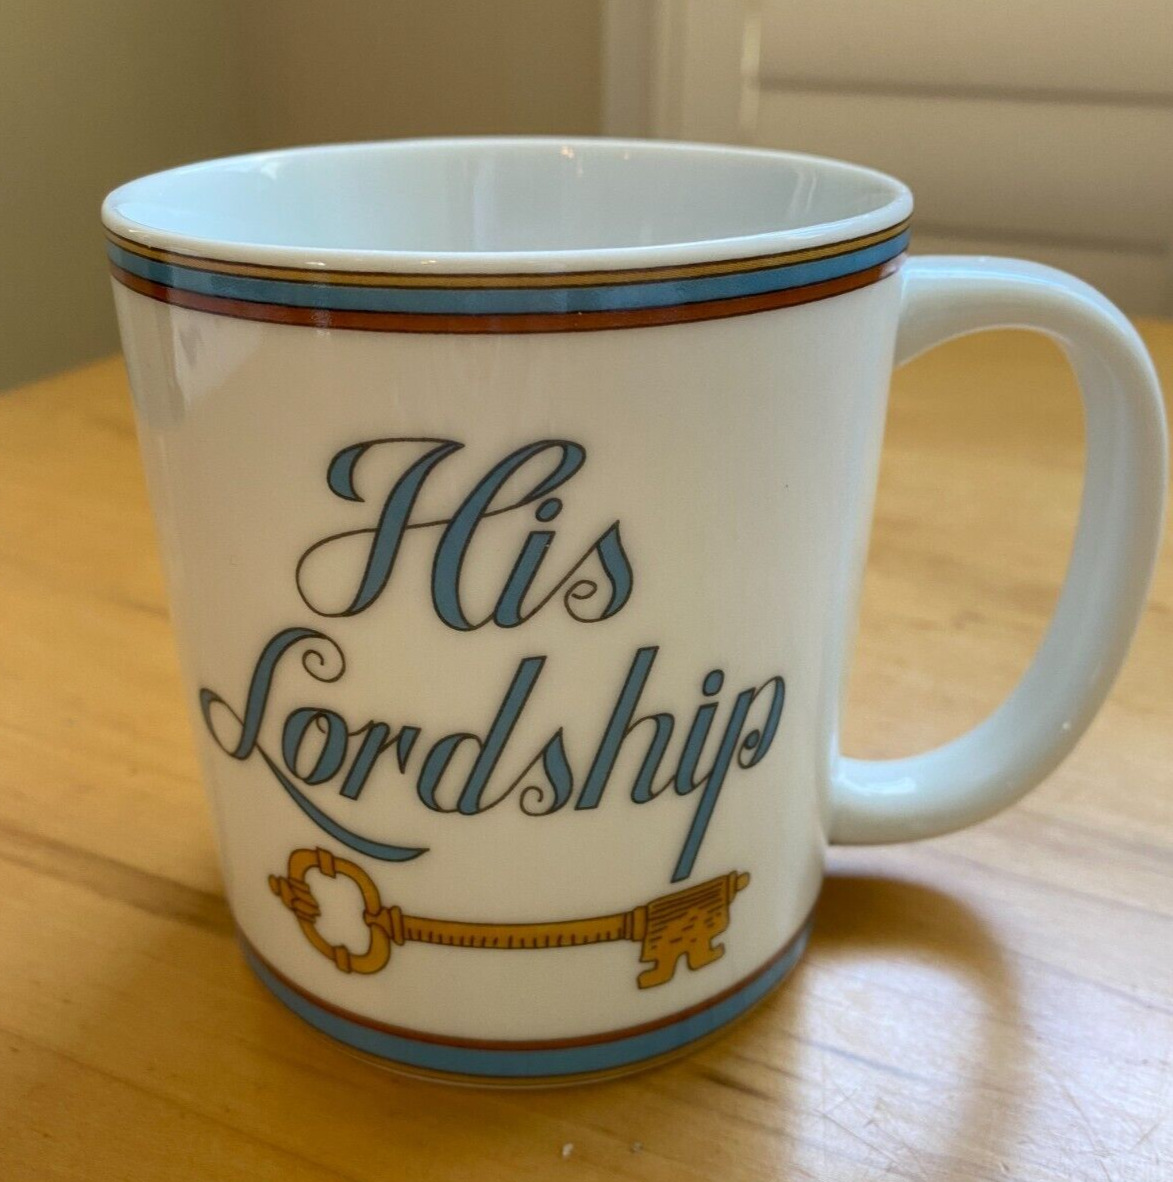 Mottahedeh Williamsburg His Lordship Mug Reserve Collection Nobility